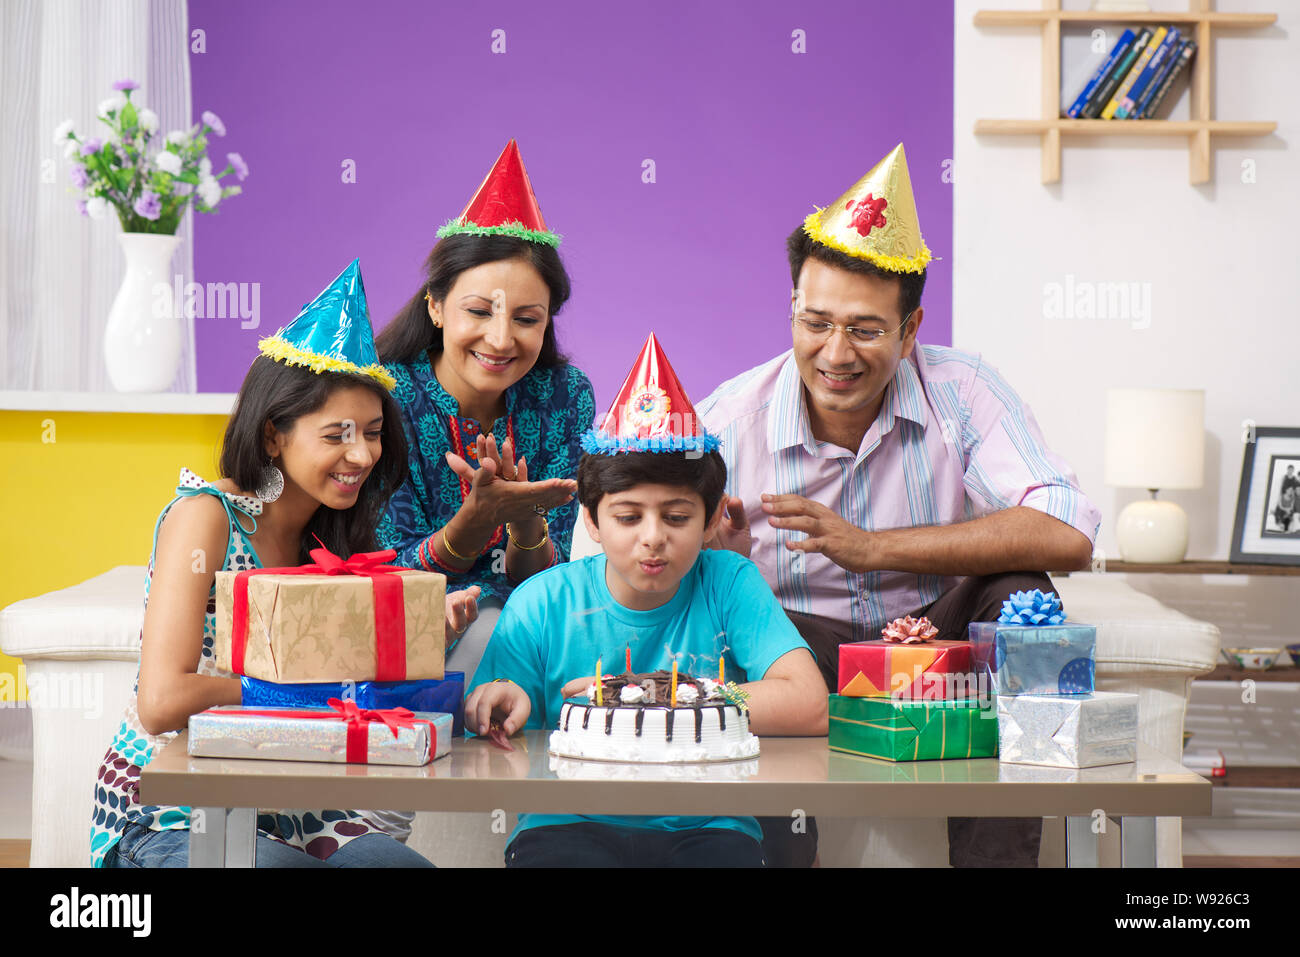 Boy blowing out birthday candles with his family Stock Photo